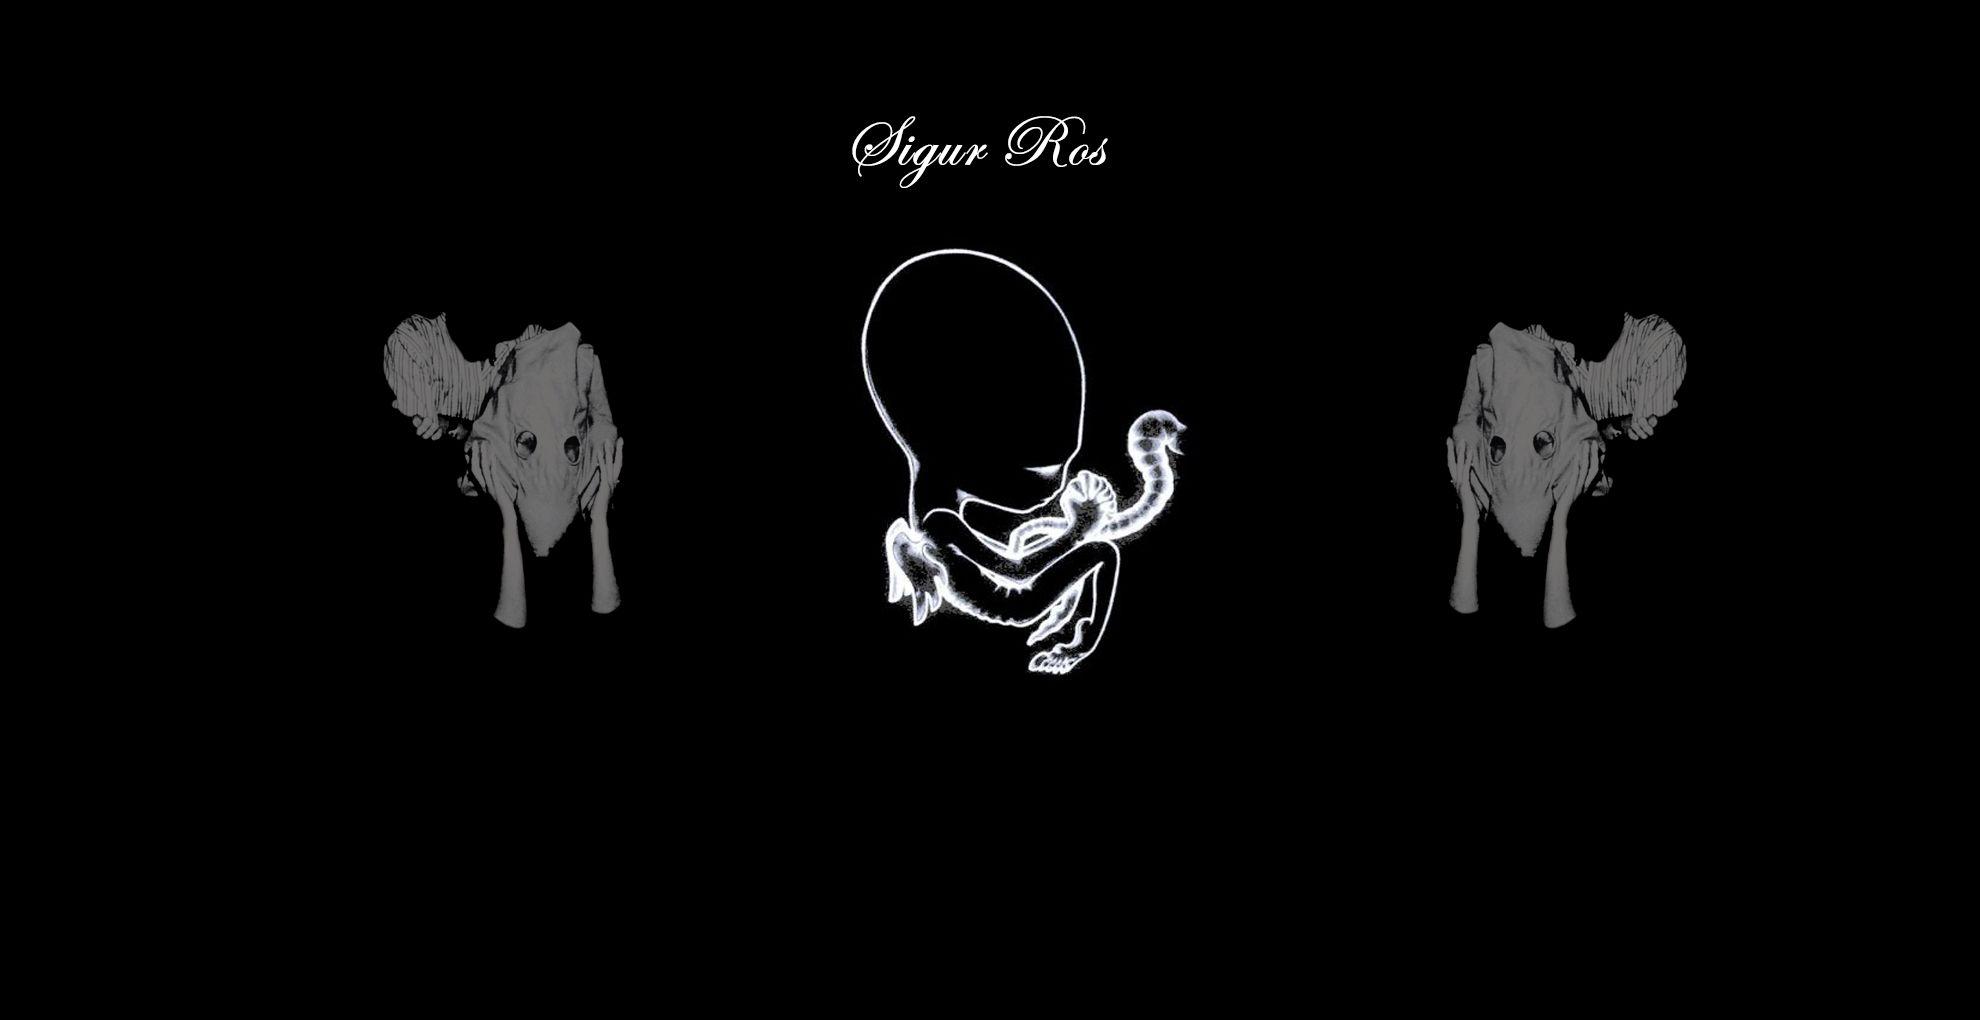 Just a wallpaper I made for any Sigur Ros fans out there 1920 x